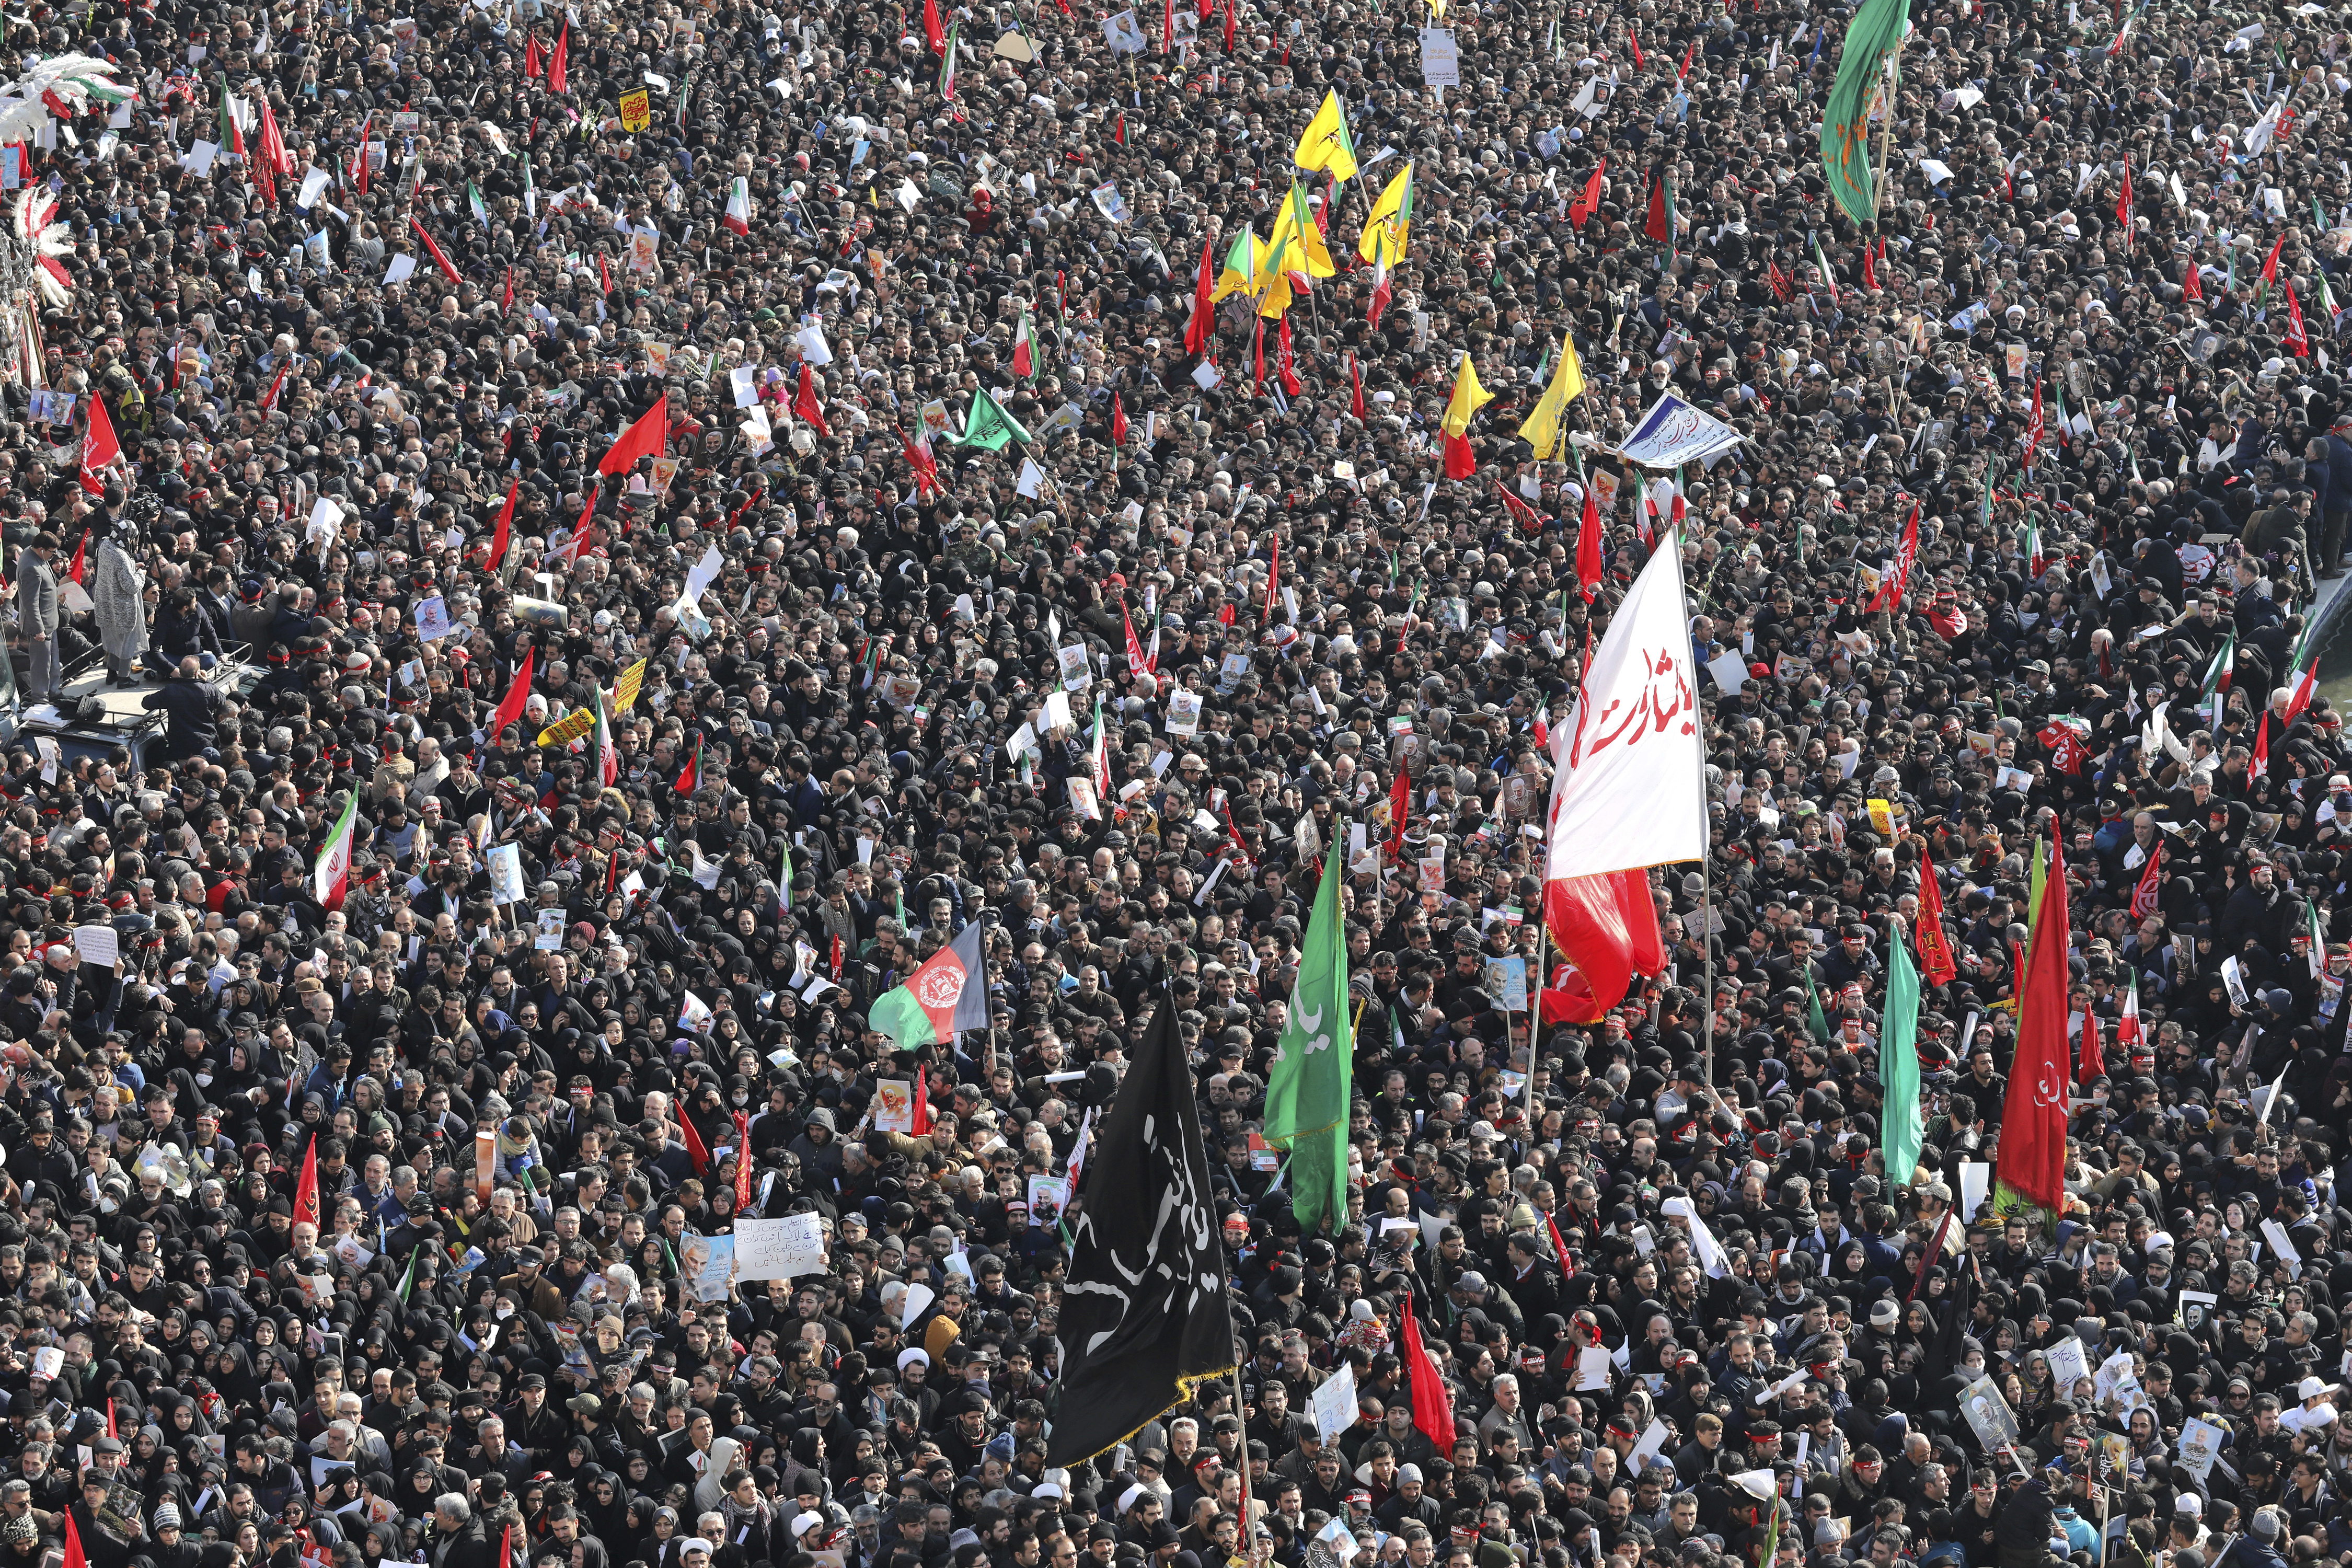 Mourners attend a funeral ceremony for Iranian Gen. Qassem Soleimani and his comrades, who were killed in Iraq in a U.S. drone strike on Friday, at the Enqelab-e-Eslami (Islamic Revolution) square in Tehran, Iran, Monday, Jan. 6, 2020. The processions mark the first time Iran honored a single man with a multi-city ceremony. Not even Ayatollah Ruhollah Khomeini, who founded the Islamic Republic, received such a processional with his death in 1989. Soleimani on Monday will lie in state at Tehran's famed Musalla mosque as the revolutionary leader did before him. (AP Photo/Ebrahim Noroozi)